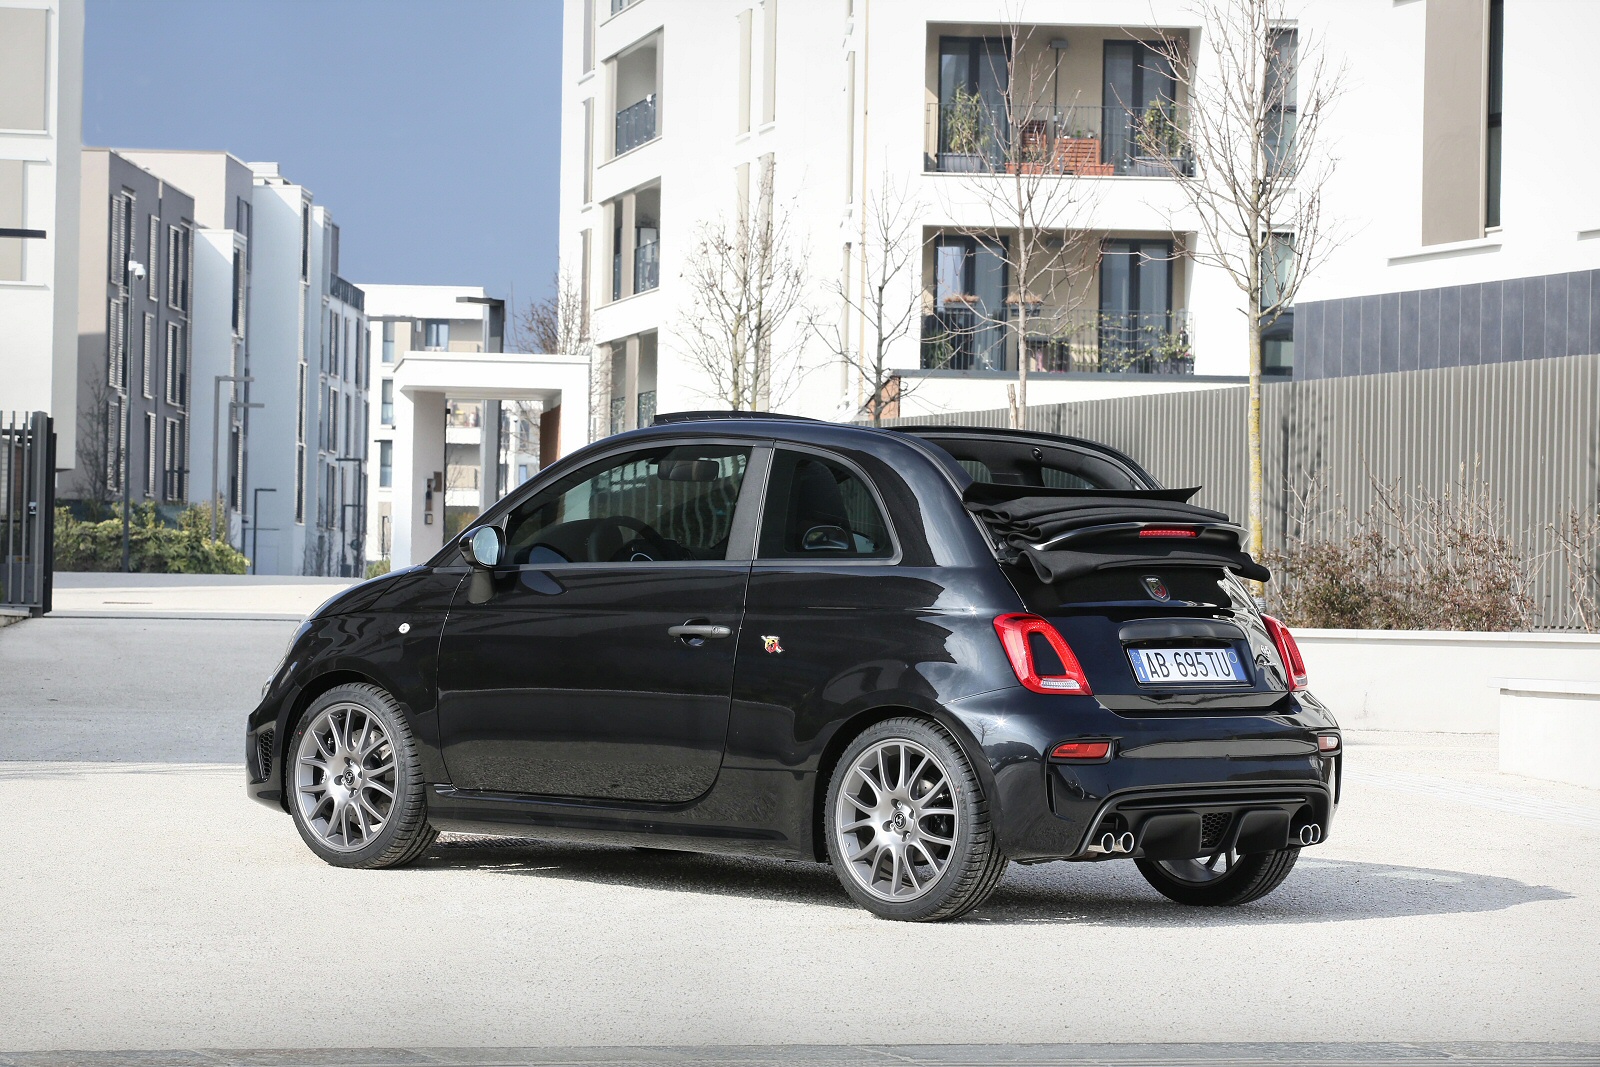 ABARTH 695C CONVERTIBLE 1.4 T-Jet 180 2dr